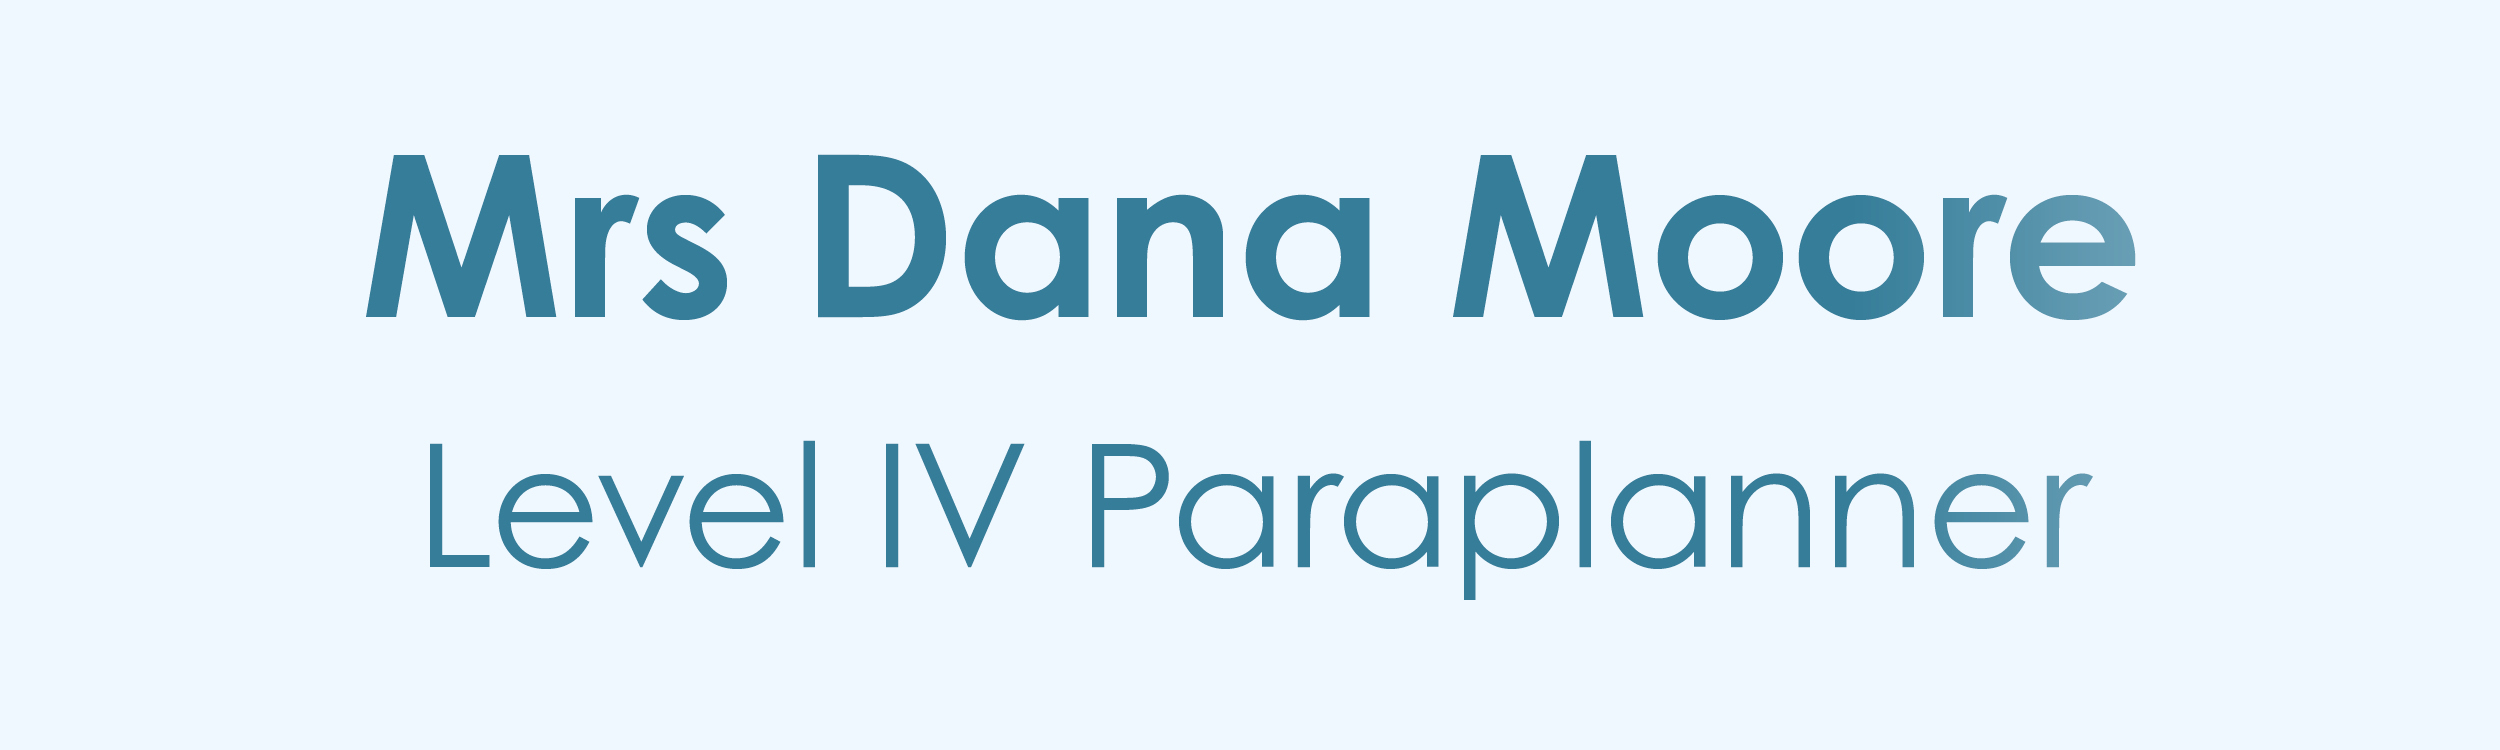 A title plaque for the picture of Mrs Dana Moore, Paraplanner